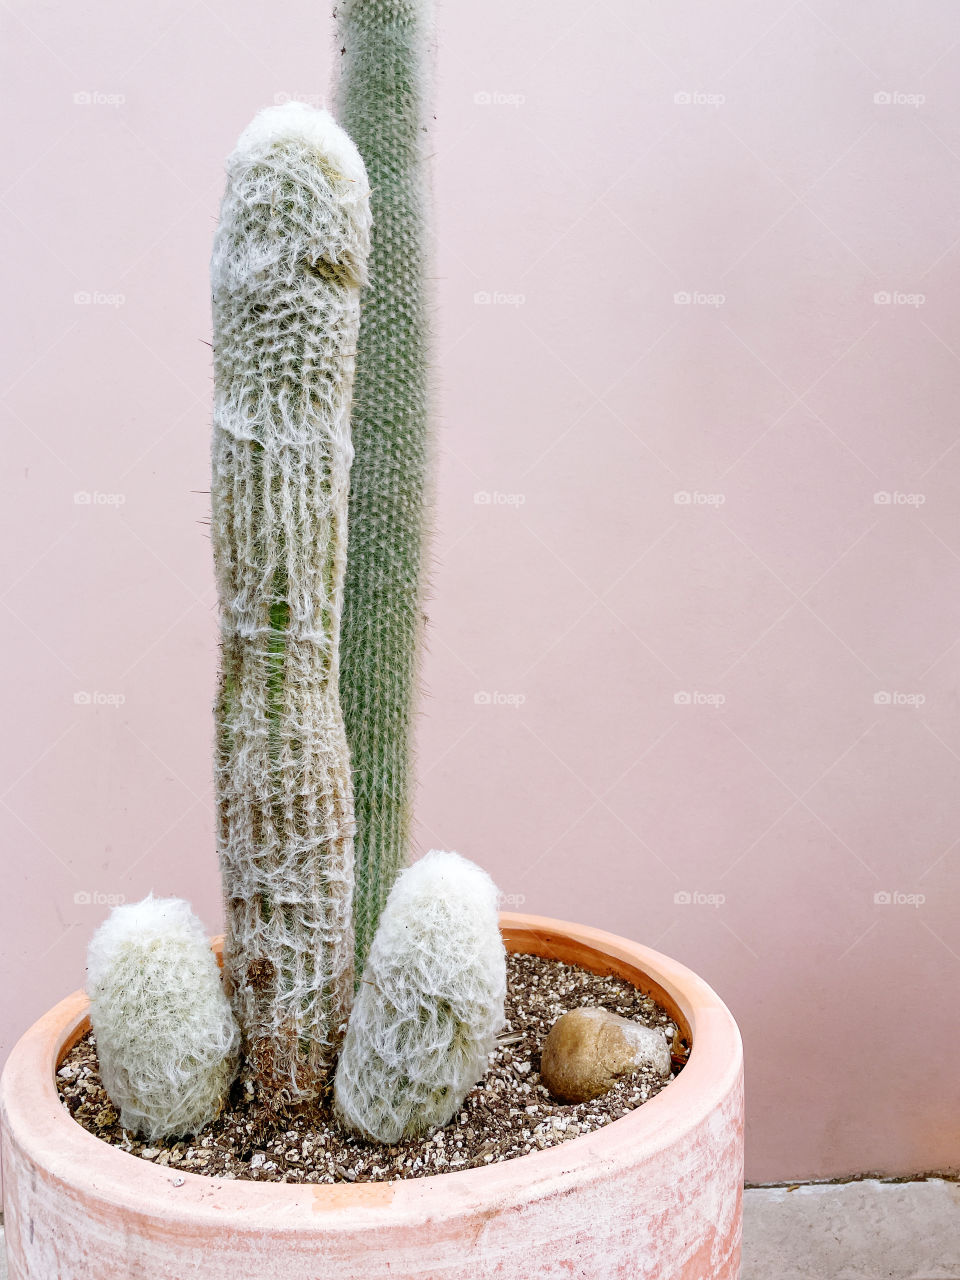 Cacti plant on the pink background 